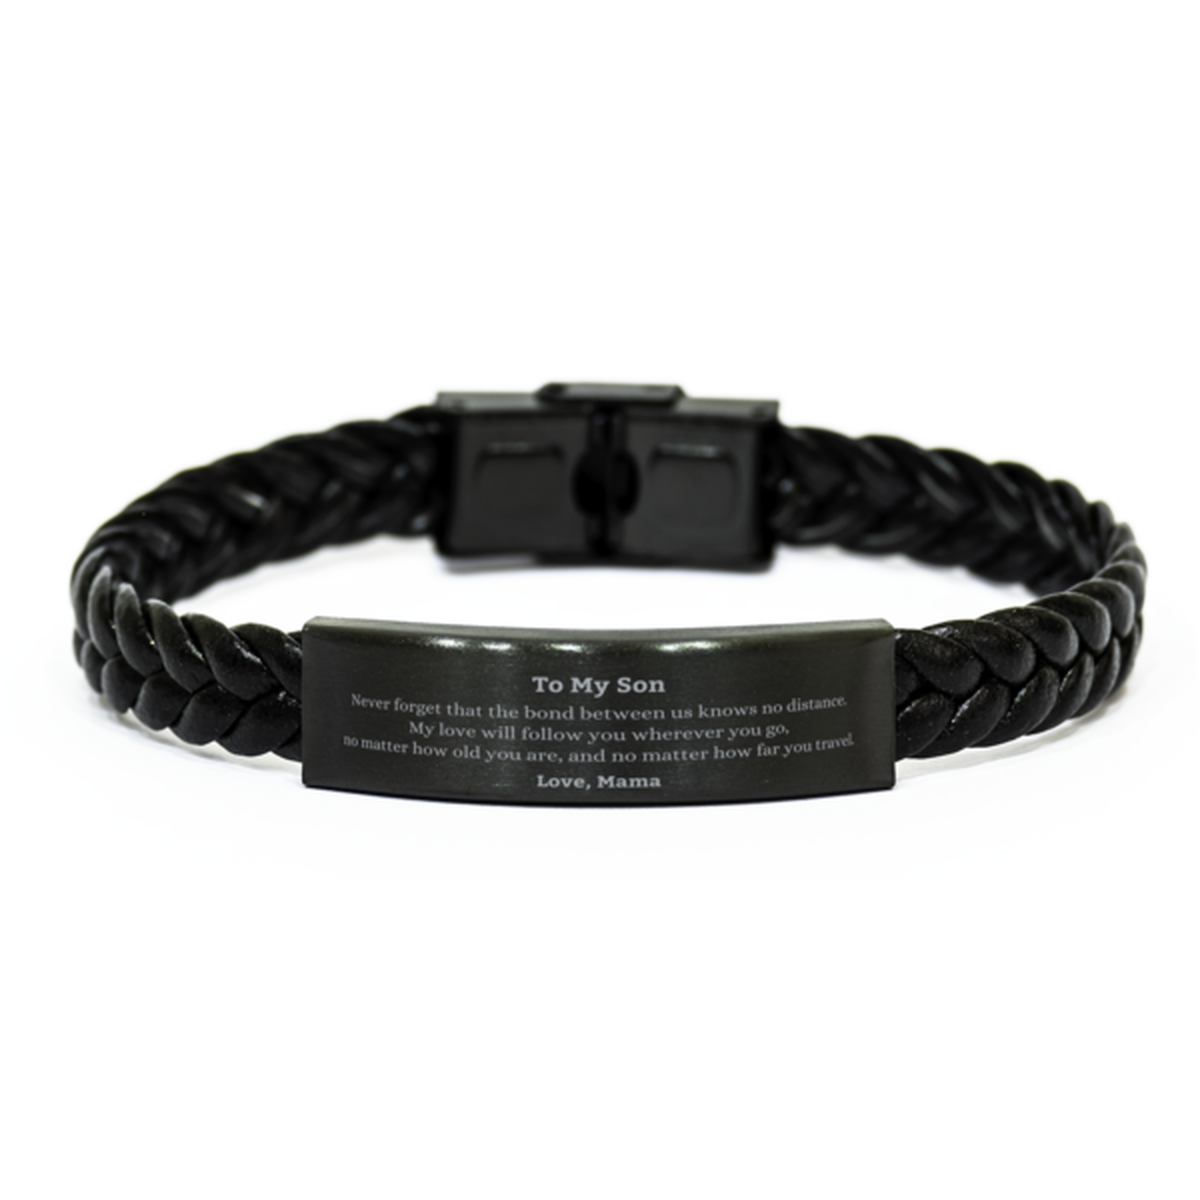 Son Birthday Gifts from Mama, Adjustable Braided Leather Bracelet for Son Christmas Graduation Unique Gifts Son Never forget that the bond between us knows no distance. Love, Mama